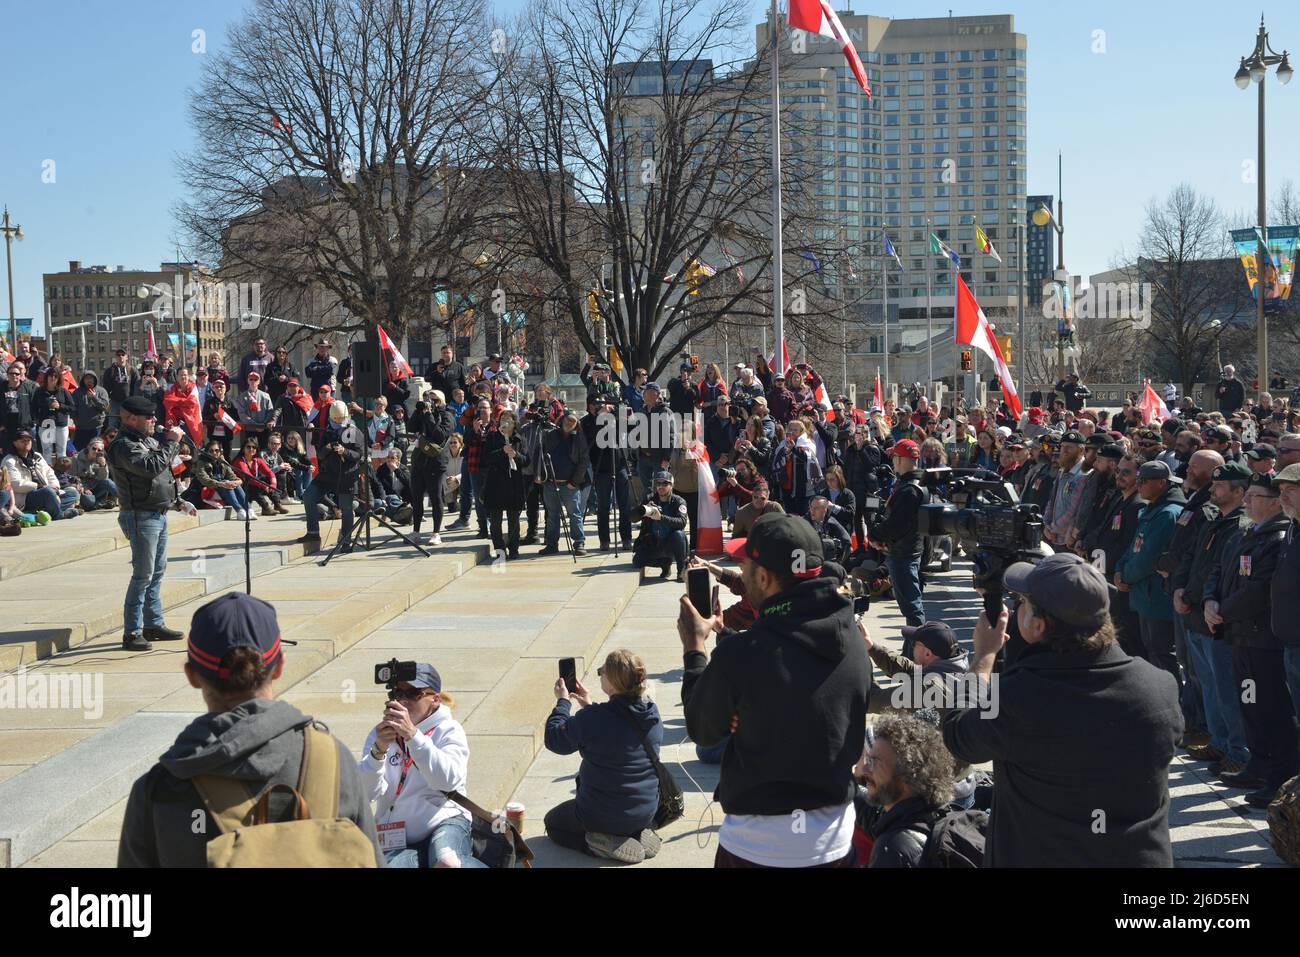 Saturday, April 30, 2022, Ottawa Canada. The “Live From The Shed”, “Freedom Fighters Canada” and “Veterans For Freedom” -- “Rolling Thunder Convoy” -- Memorial Event/ Protest.  Veterans from these groups gave impassioned speeches and laid at a ceremonial wreath at the foot of The National War Memorial before a sizeable crowd, this followed by an indeed, thunderous parade of motorcycles doing a pass-by on Elgin Street just south of The Memorial. Many Ottawa and Ontario Provincial Police Services Members were also on hand to protect public safety. Stock Photo